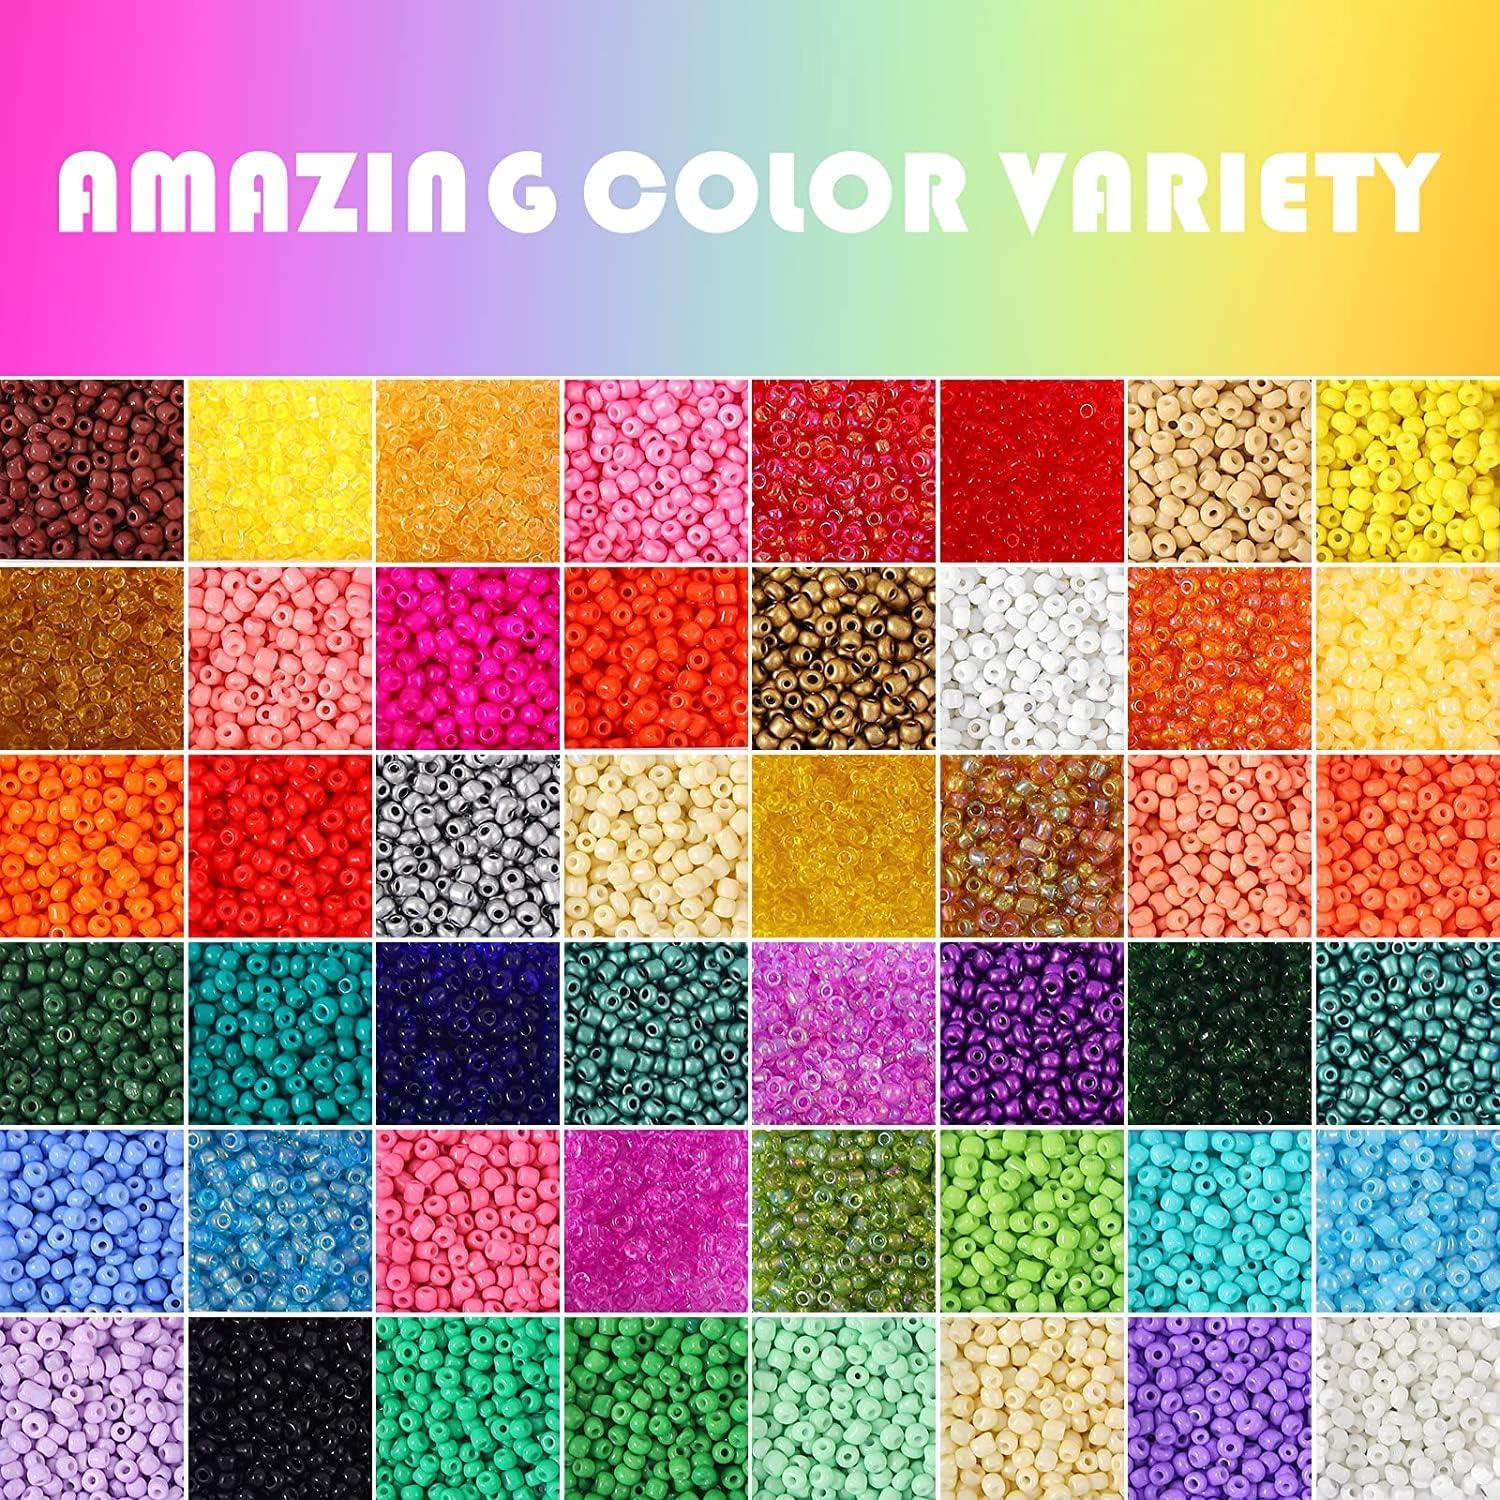 36000+pcs 2/3mm 48 Colors Glass Seed Beads For Bracelet Jewelry Making Kit,  Beads Assortments Kit For Necklace Ring Making Best Birthday Gifts